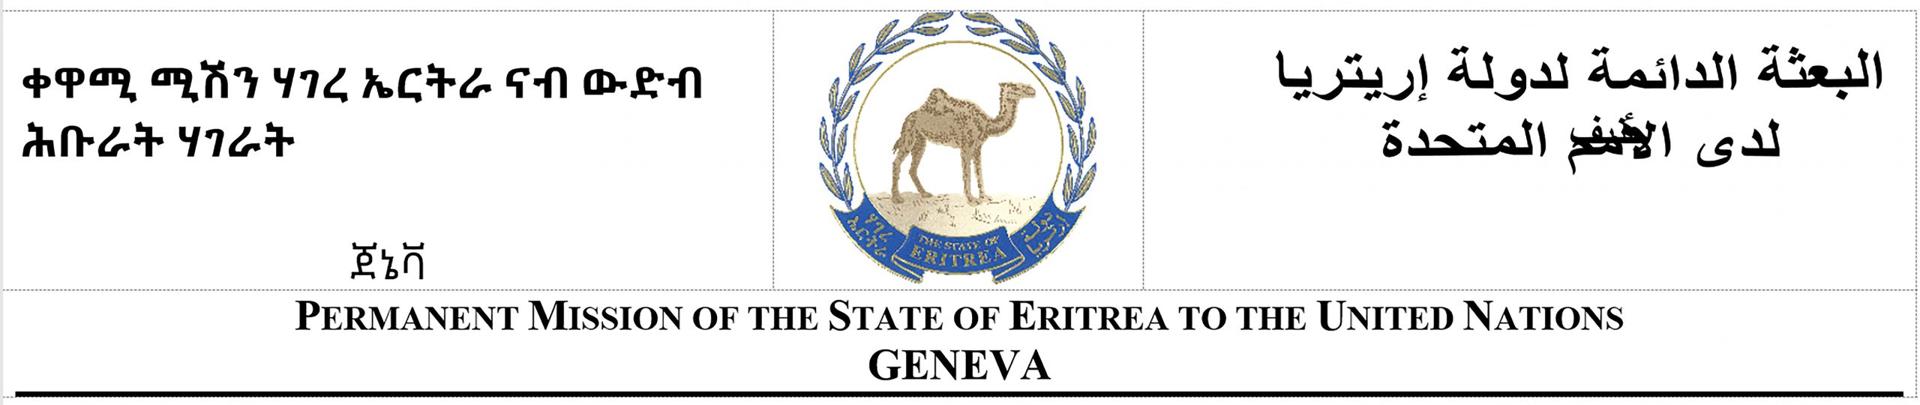 Statement of the Delegation of Eritrea to the 51st Session of the UNHRC